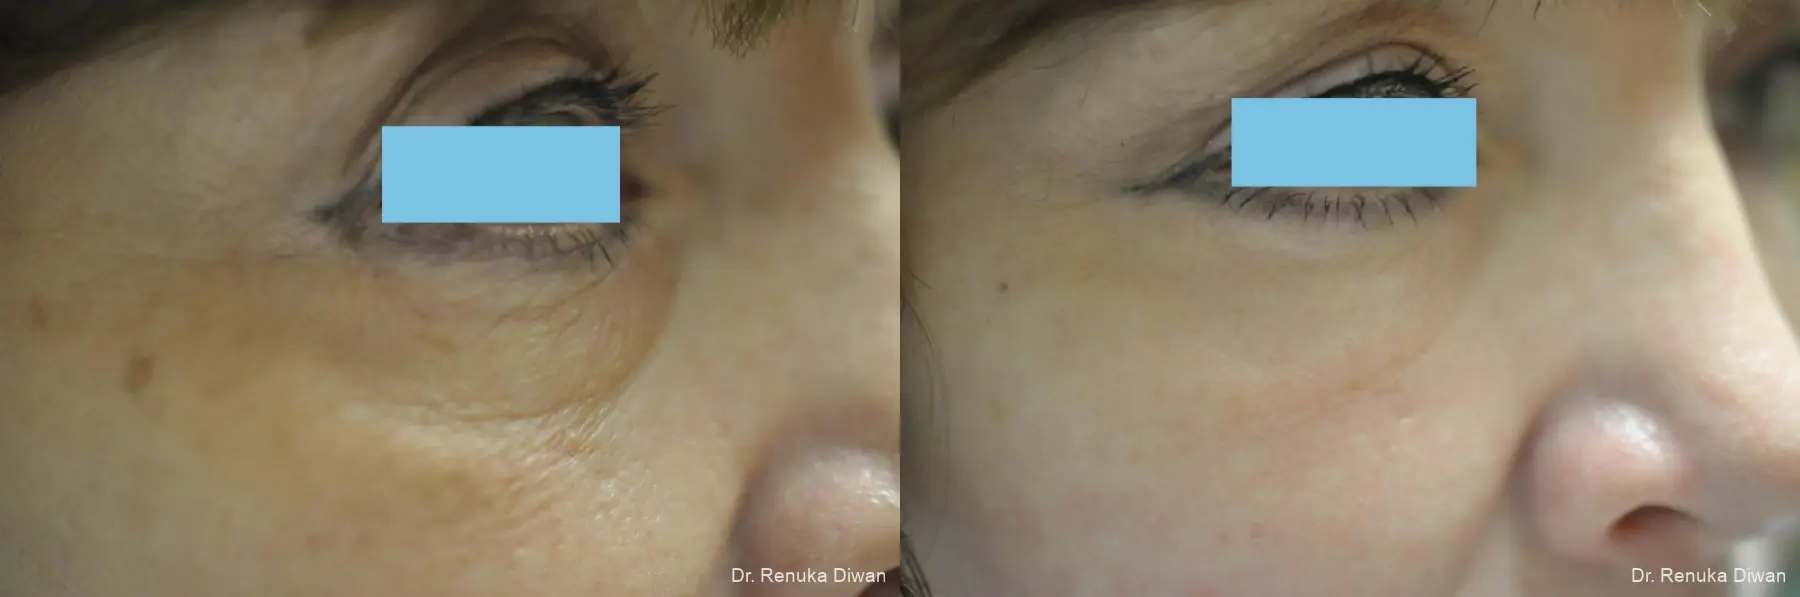 Laser Skin Resurfacing: Patient 13 - Before and After 3